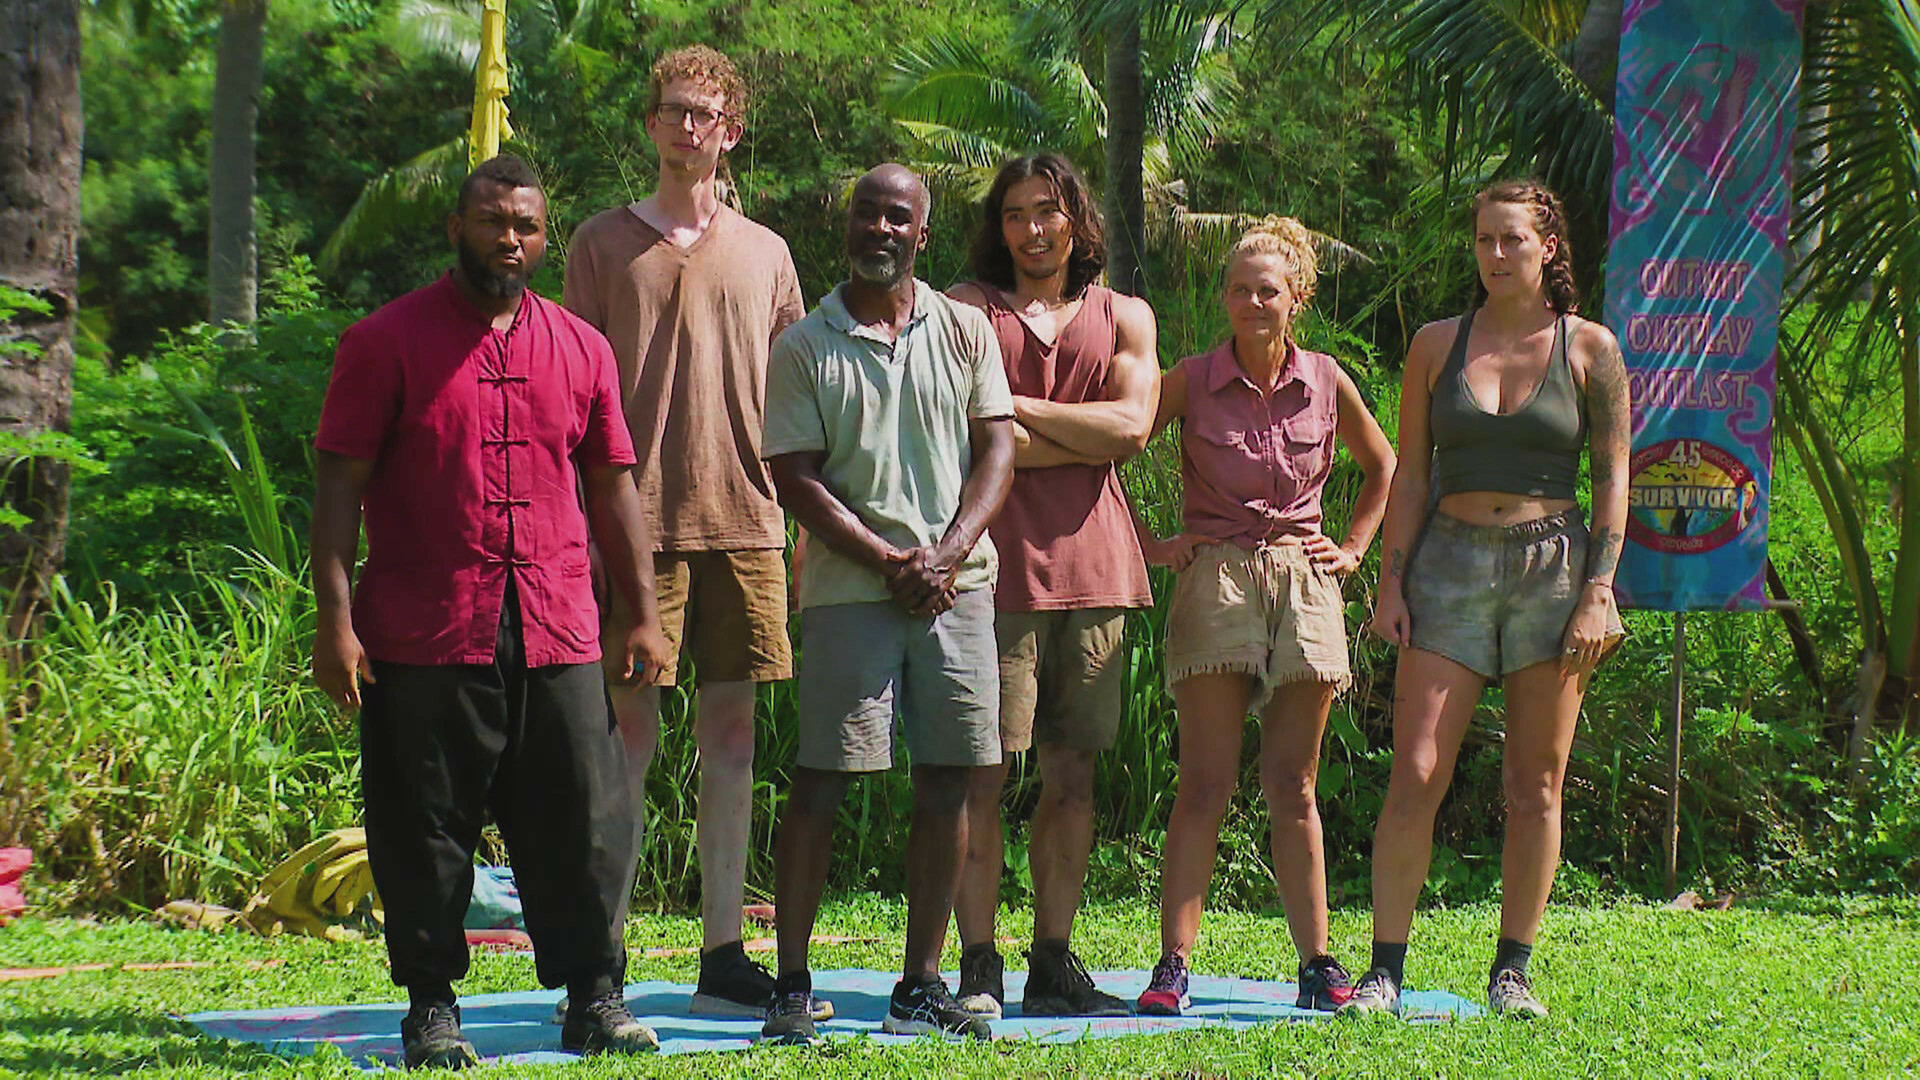 How to watch Survivor season 45 online: Release date and time